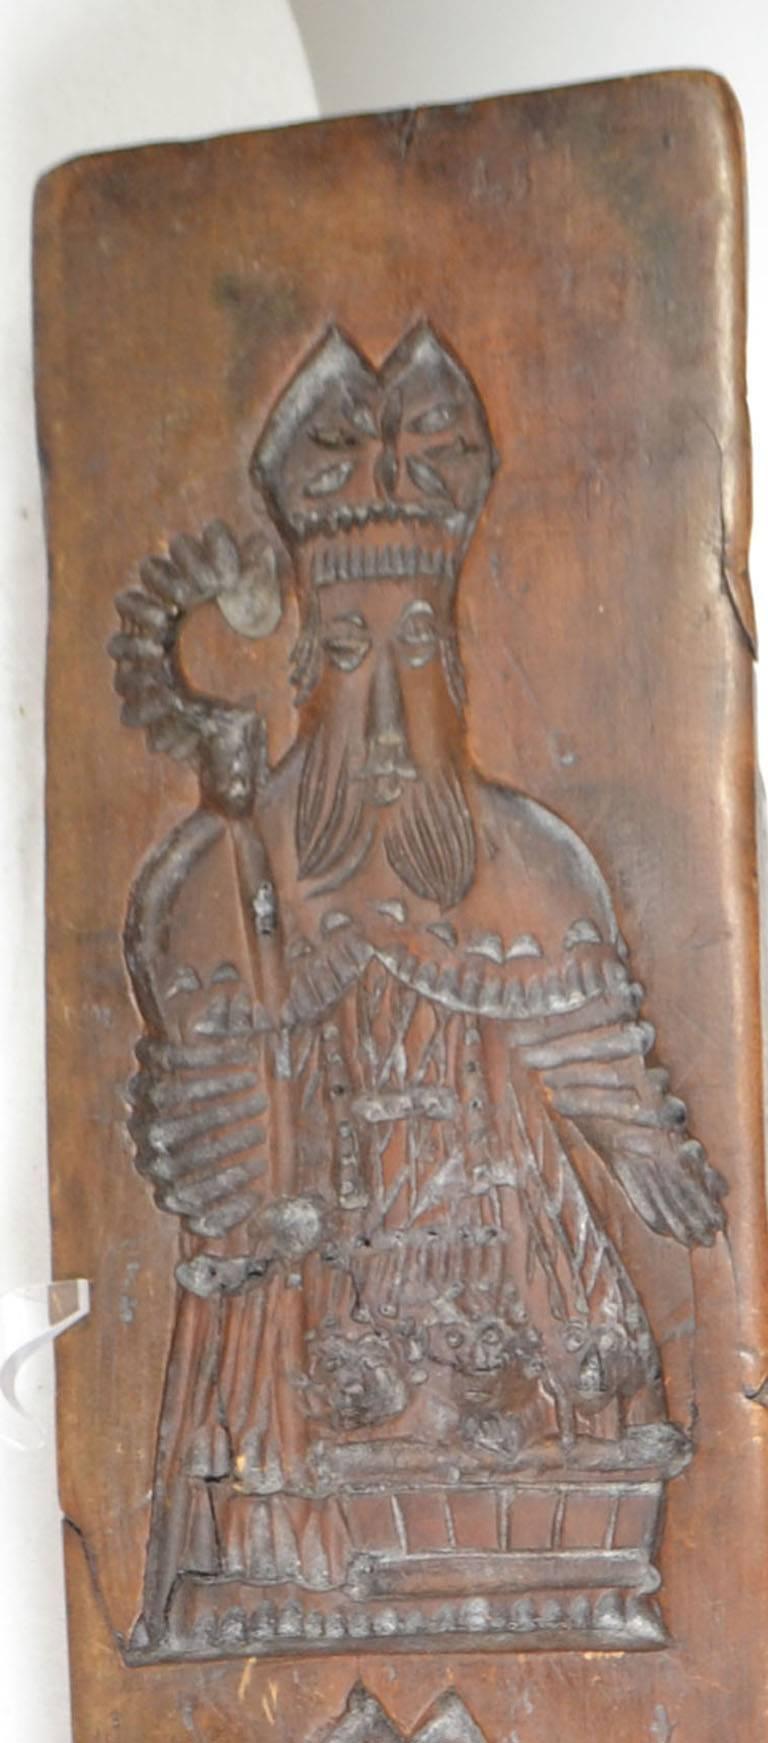 Wooden gingerbread mold (two religious figures or bishops).